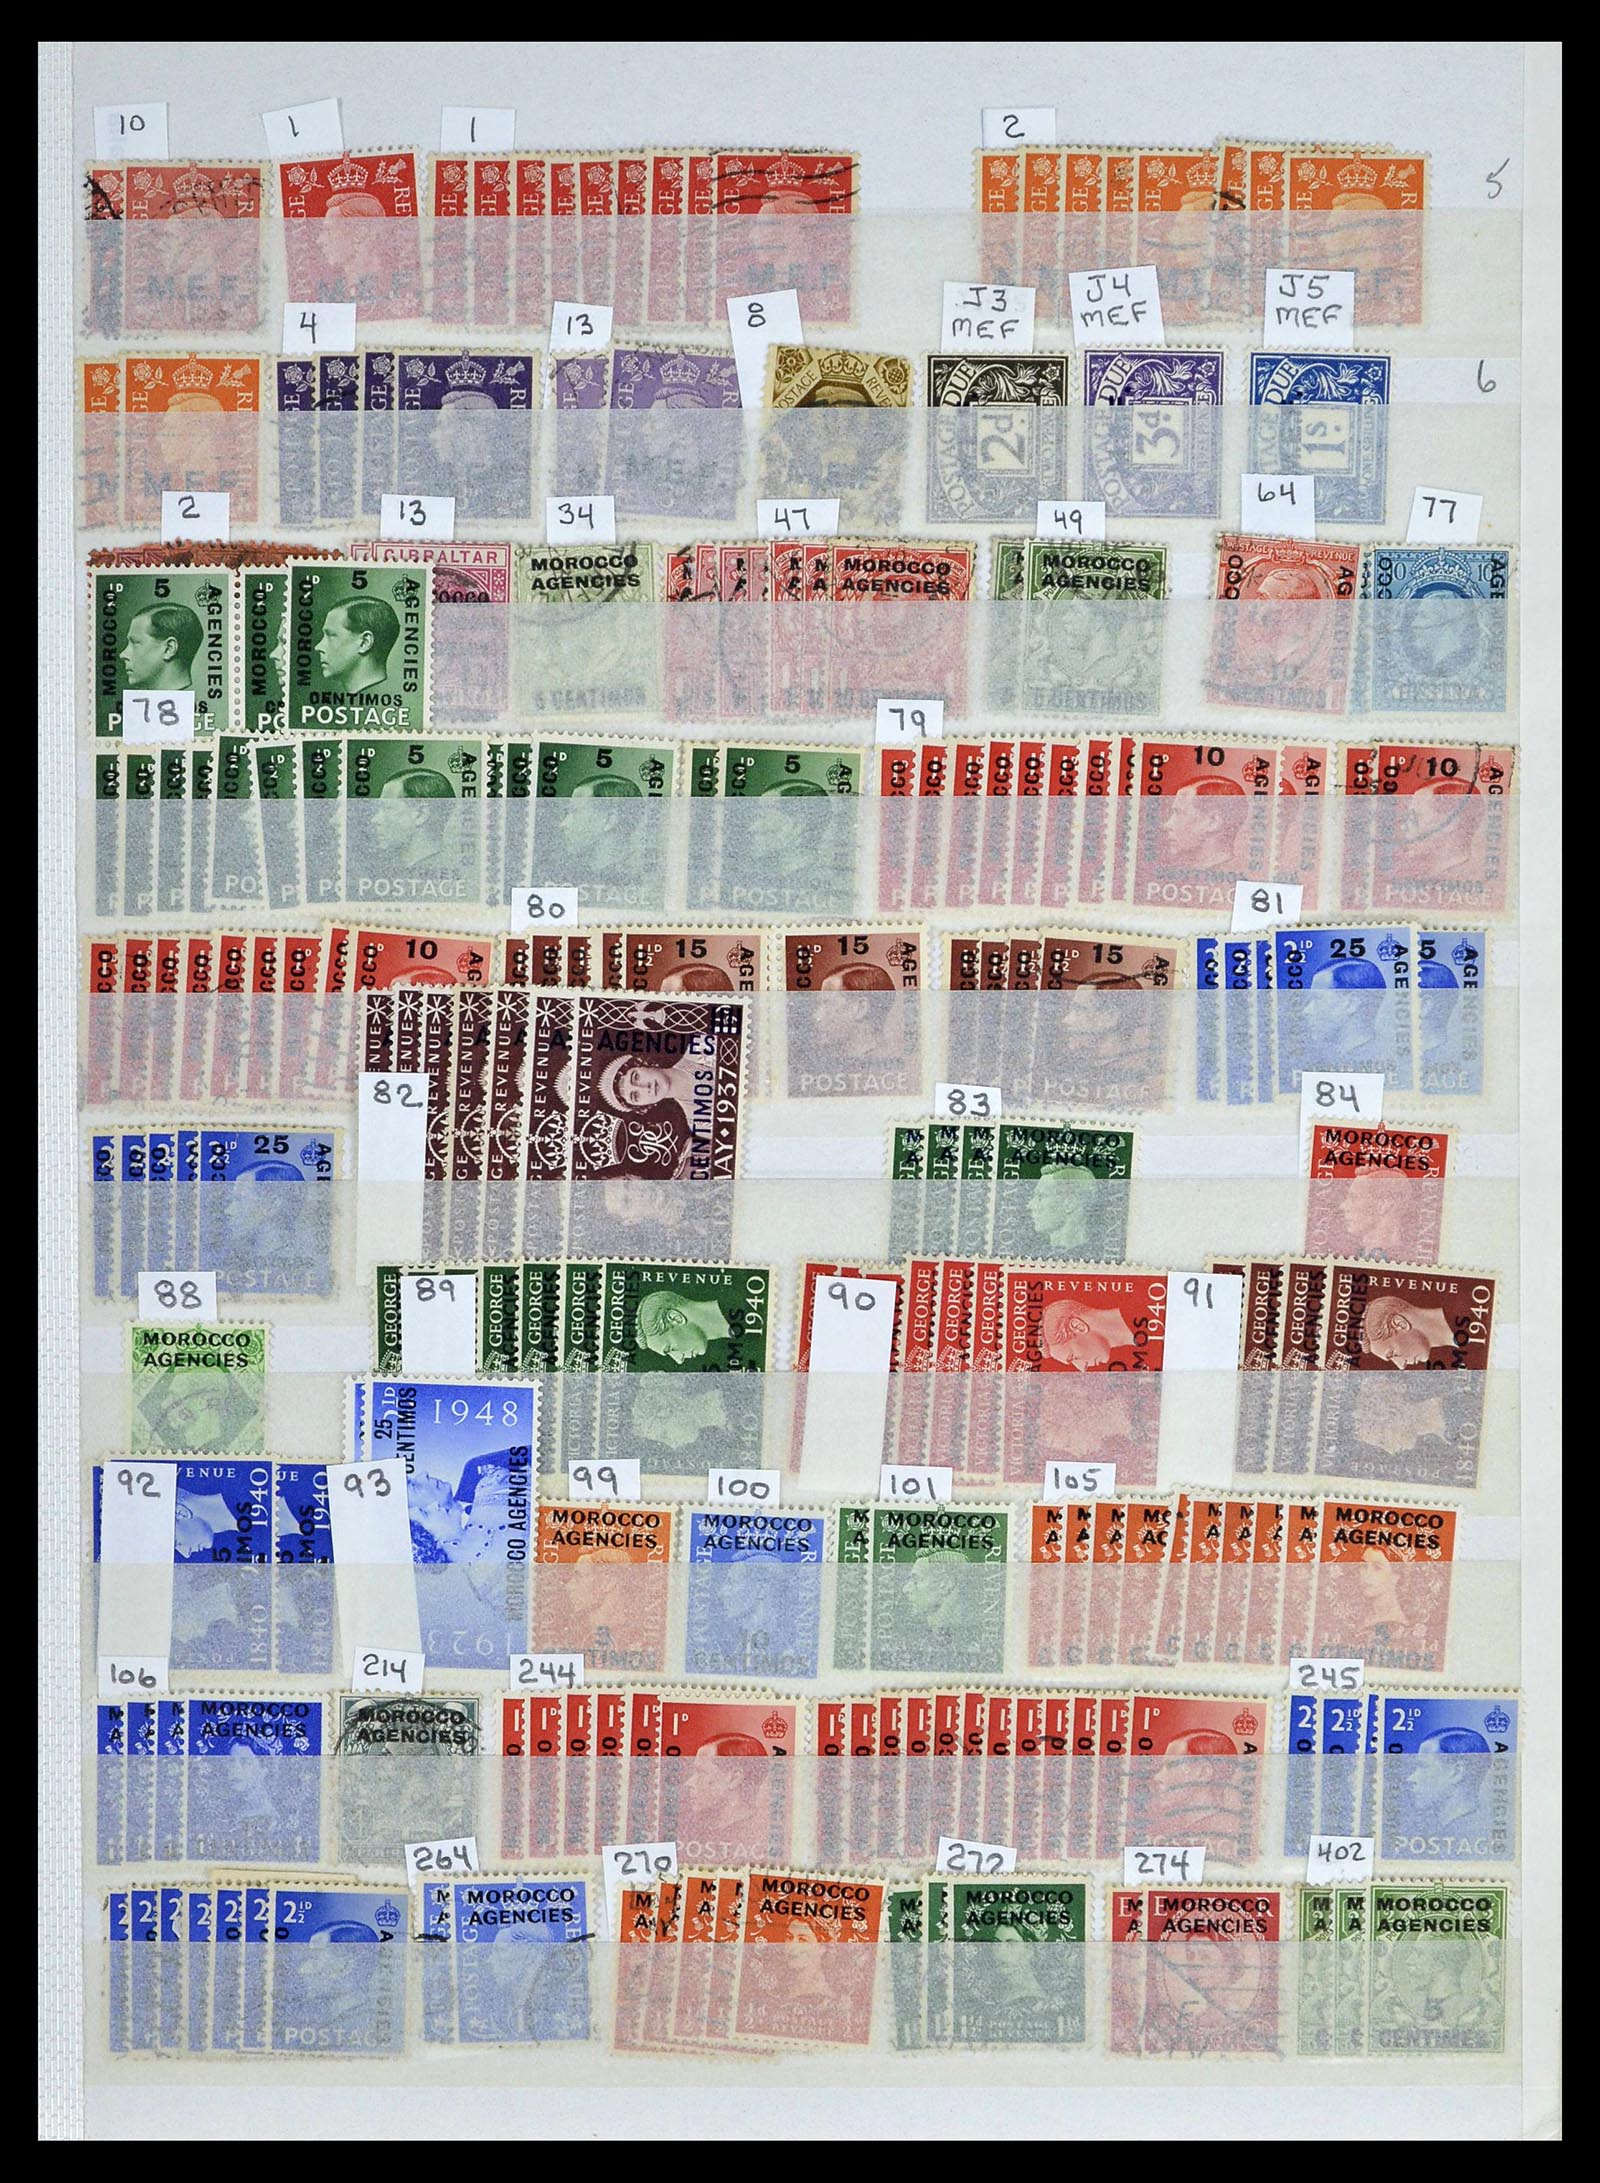 39196 0058 - Stamp collection 39196 Great Britain 1844-1955.